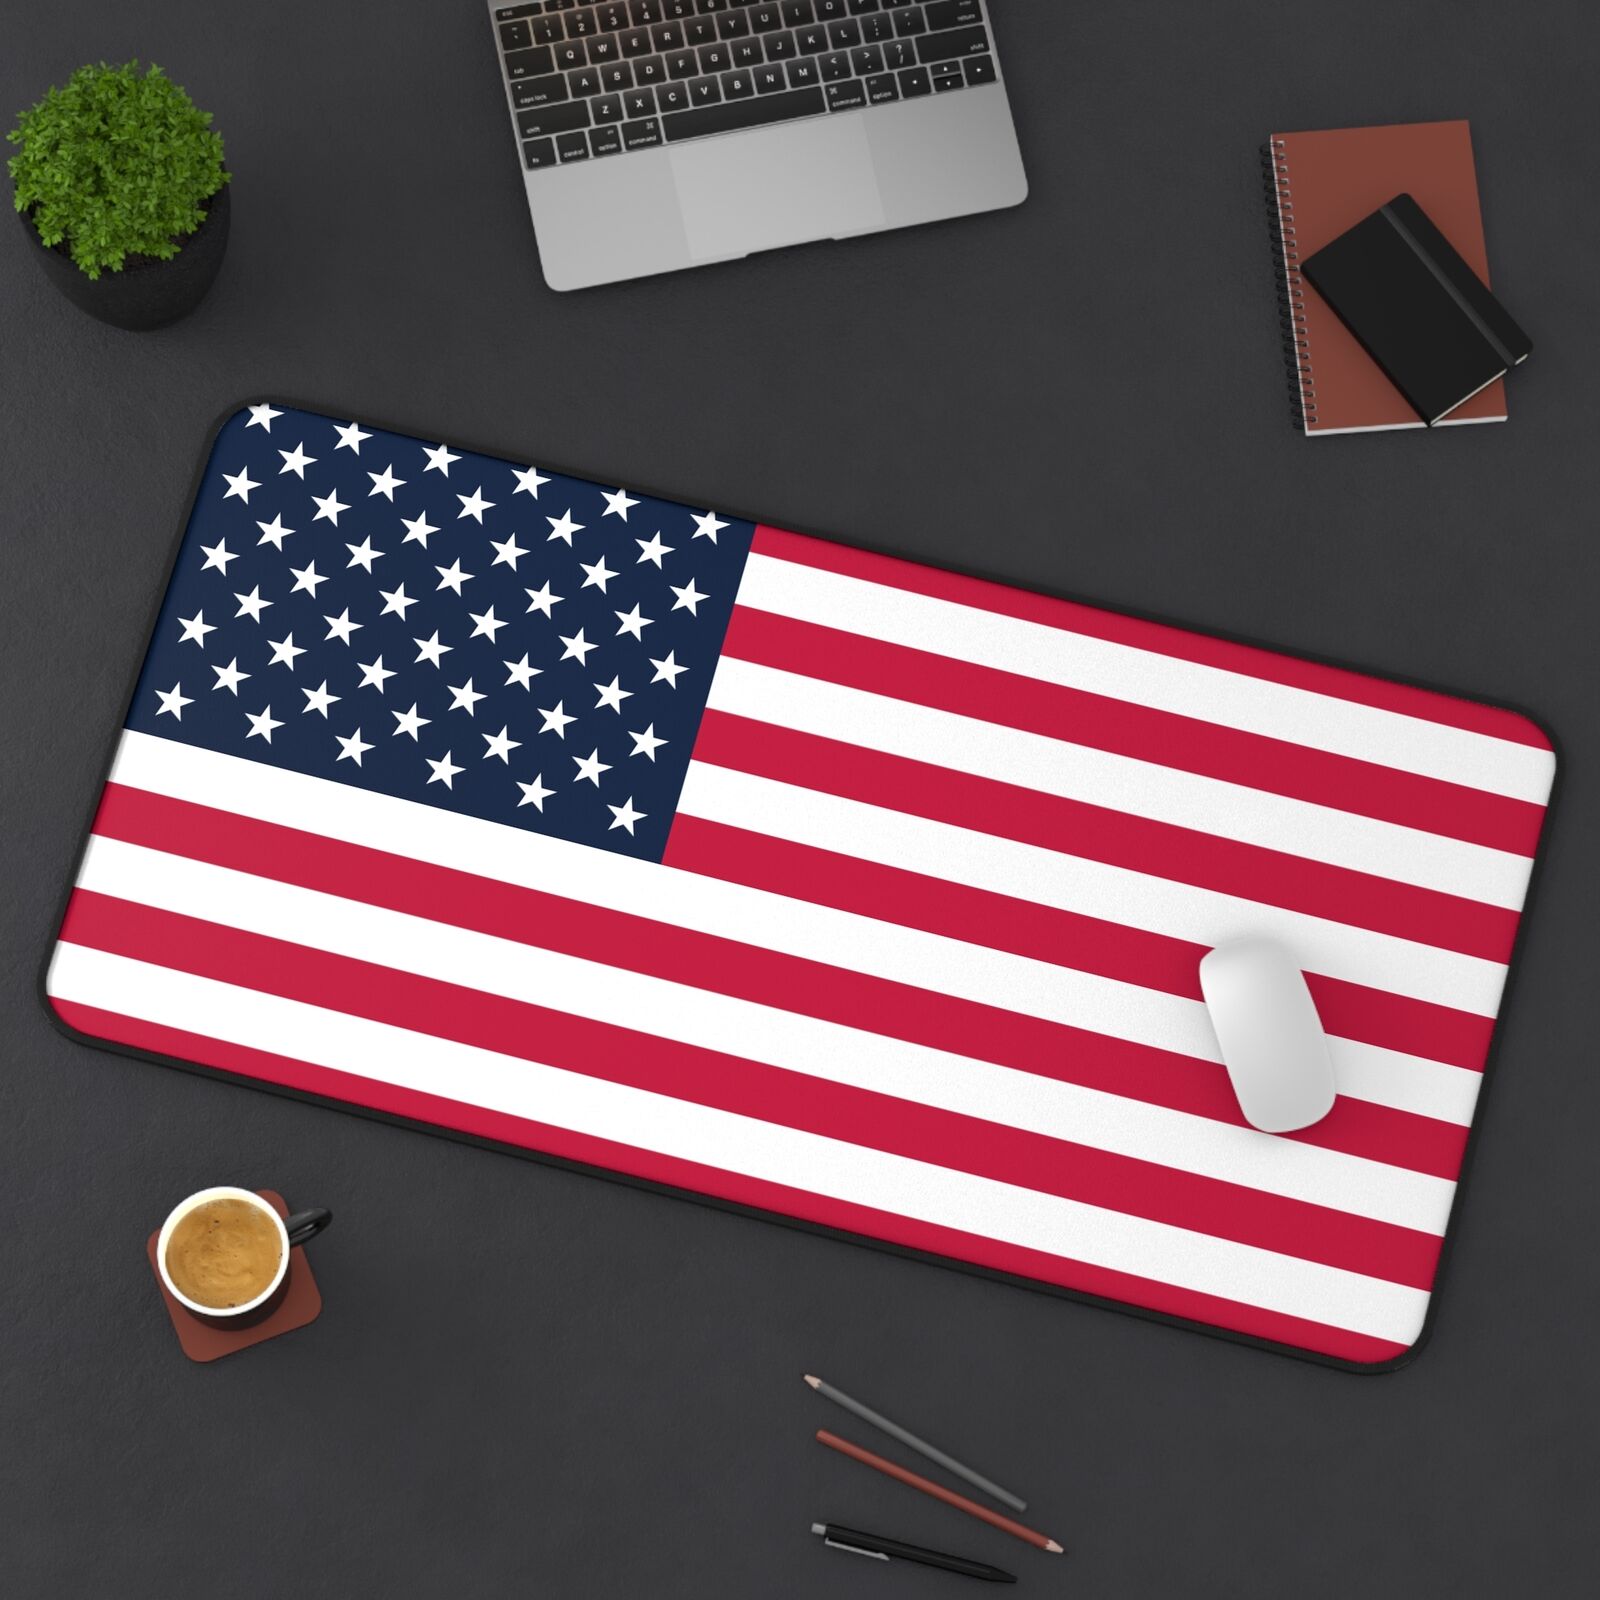 USA United States of America Flag - High Quality Stitched Edges - Desk Mouse Pad